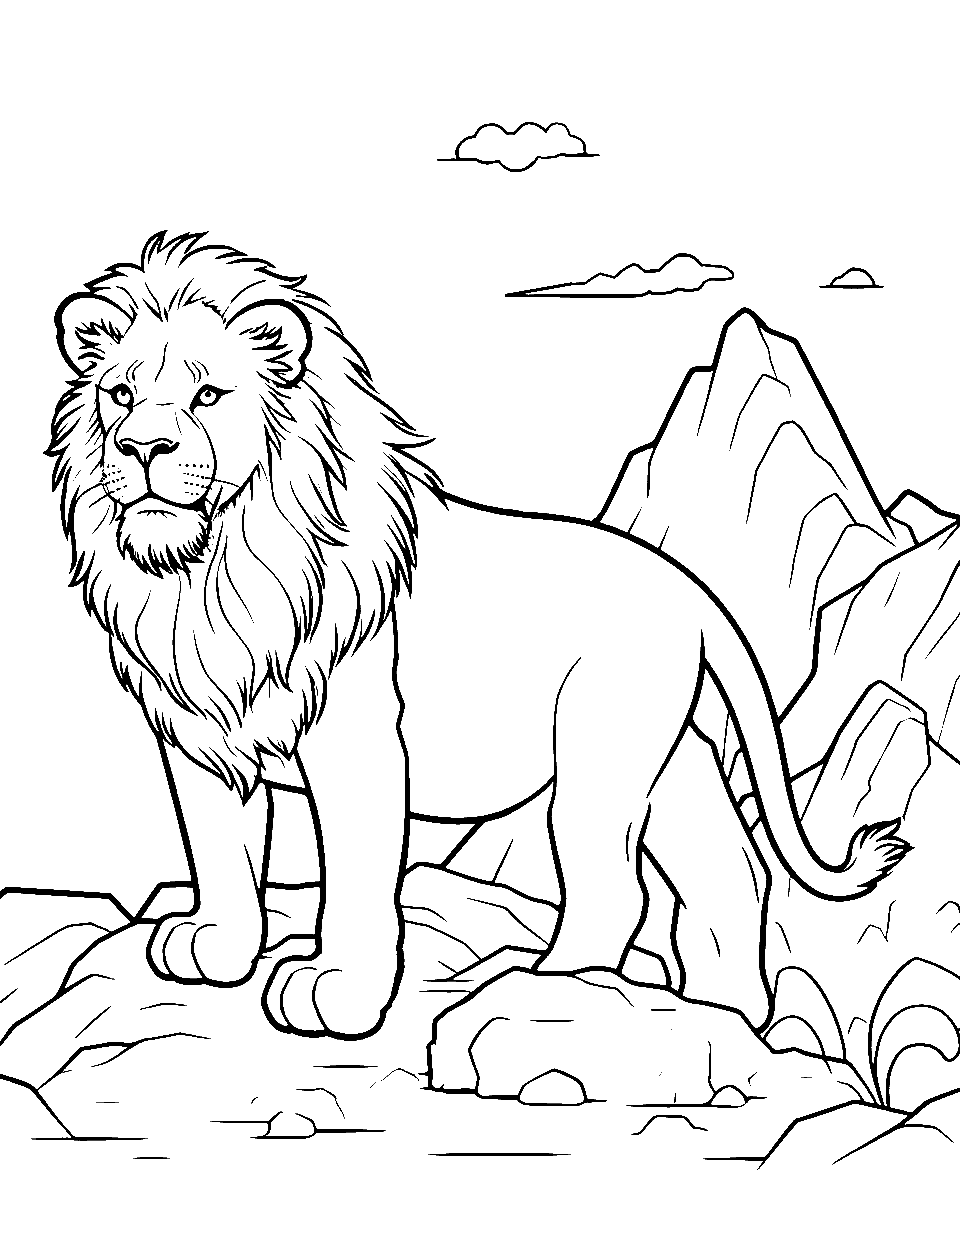 Difficult Lion Scene Coloring Page - A detailed scene with a lion navigating rocky terrain.